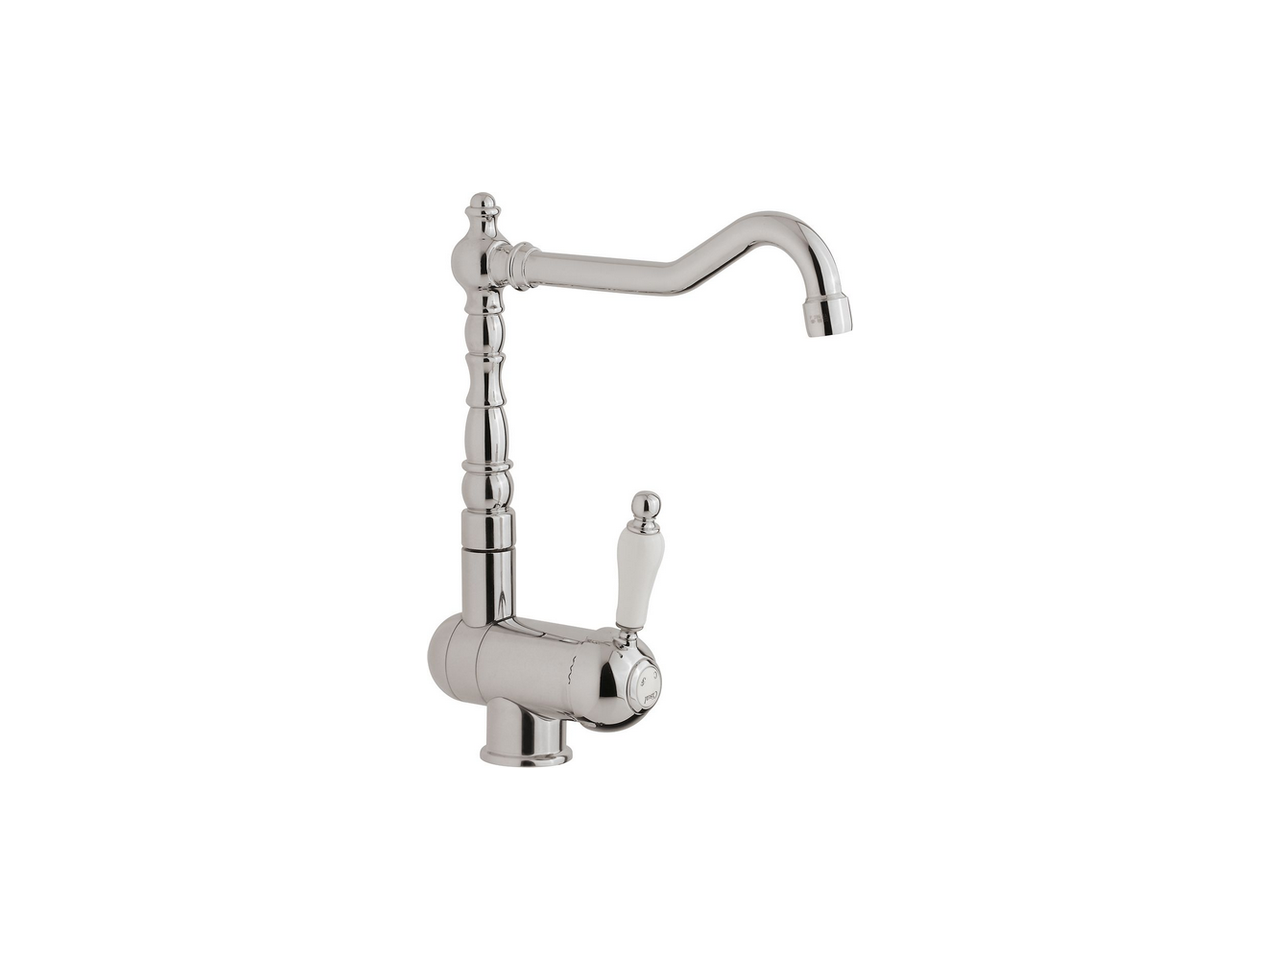 CisalSingle lever sink mixer with reclined spout KITCHEN_EM001530